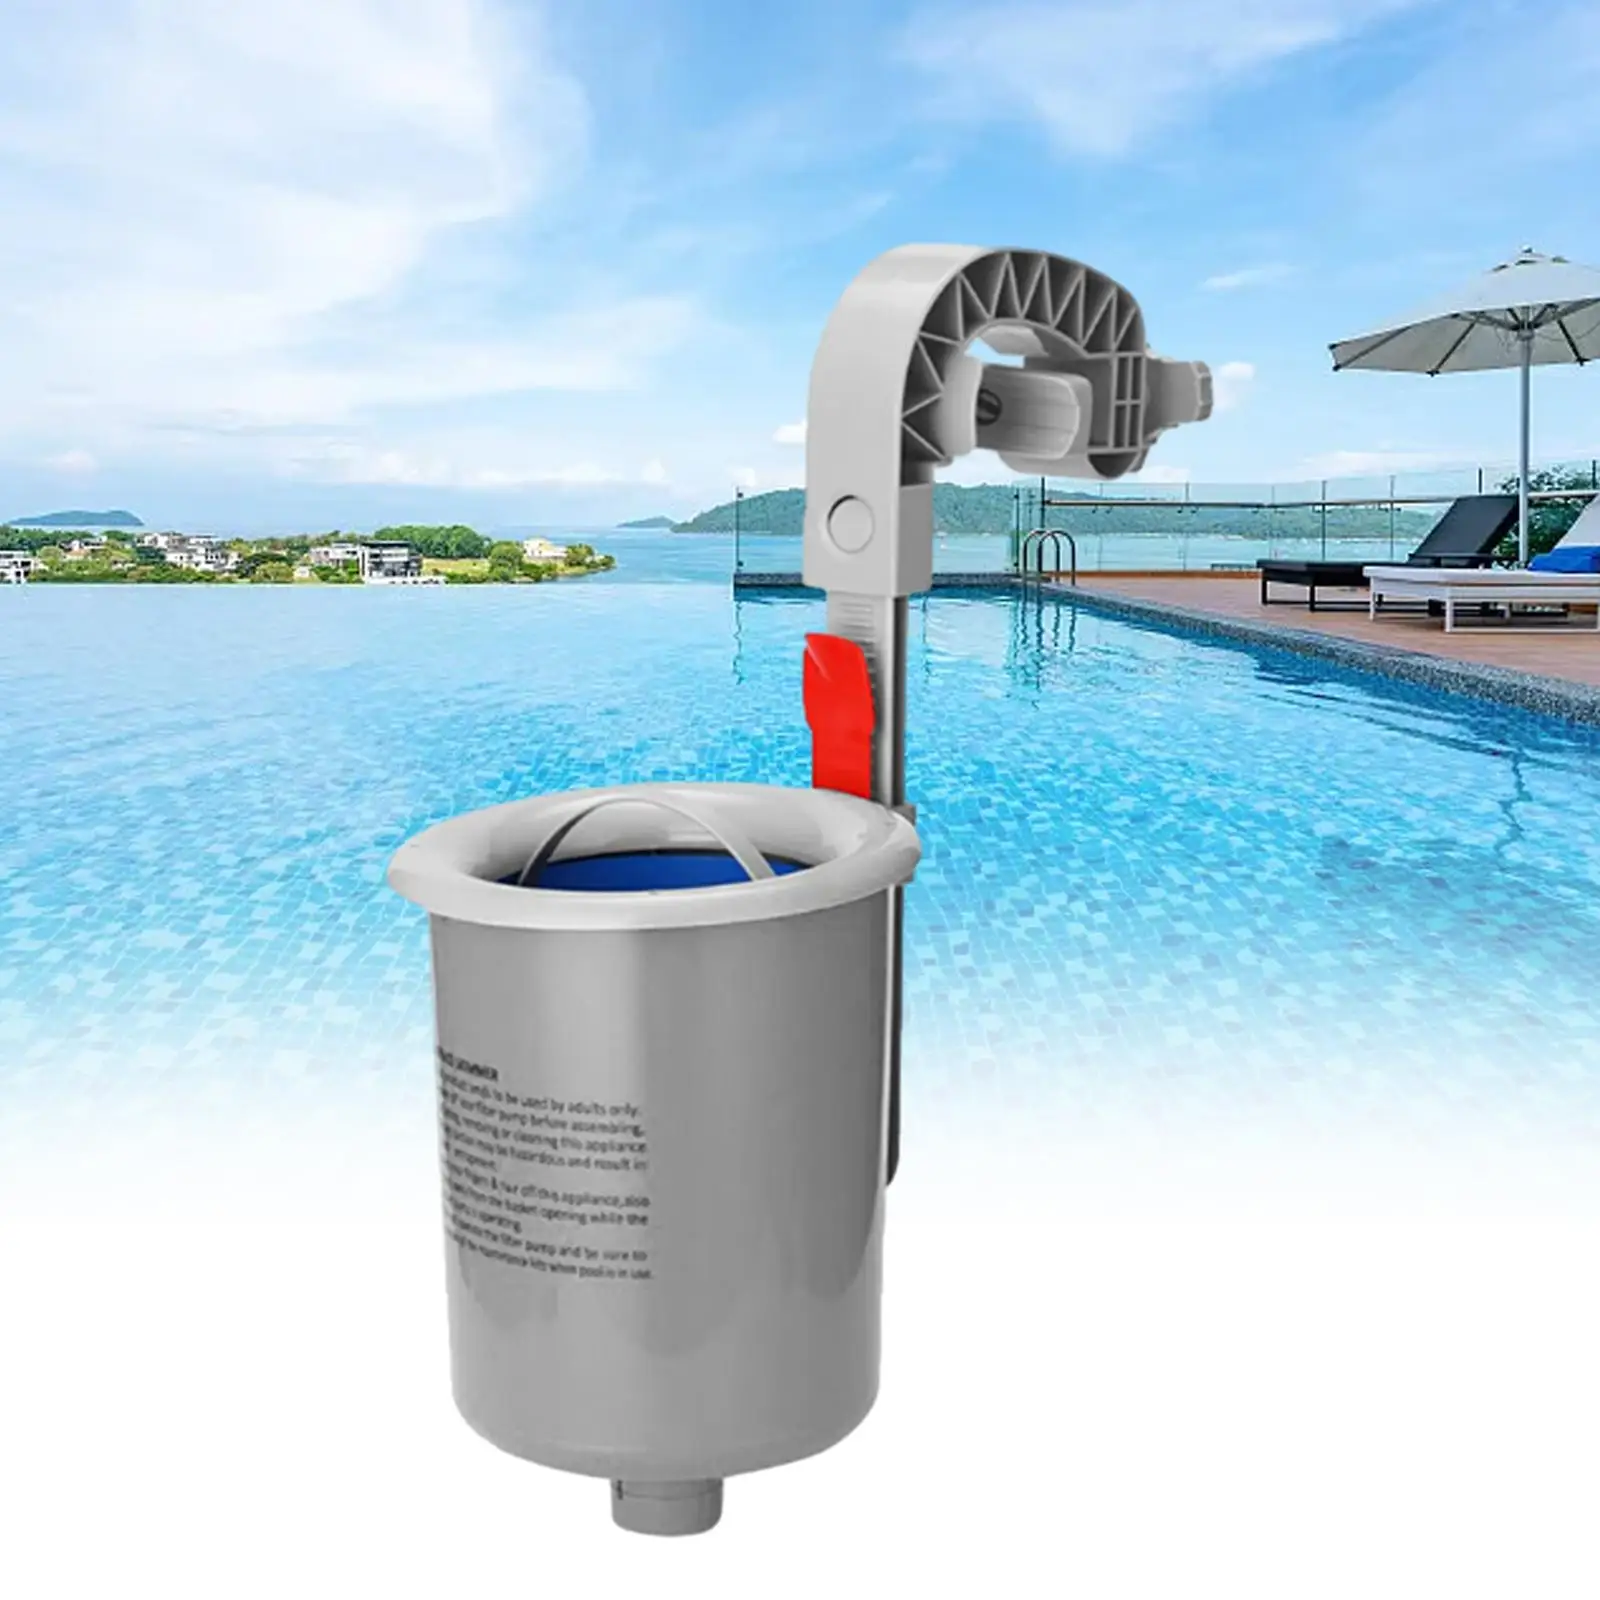 Pond Skimmer Kits Wall Mount Floating Pool Filter Easy to Install Pool Maintenance Cleaner Durable above Ground Pool Skimmer